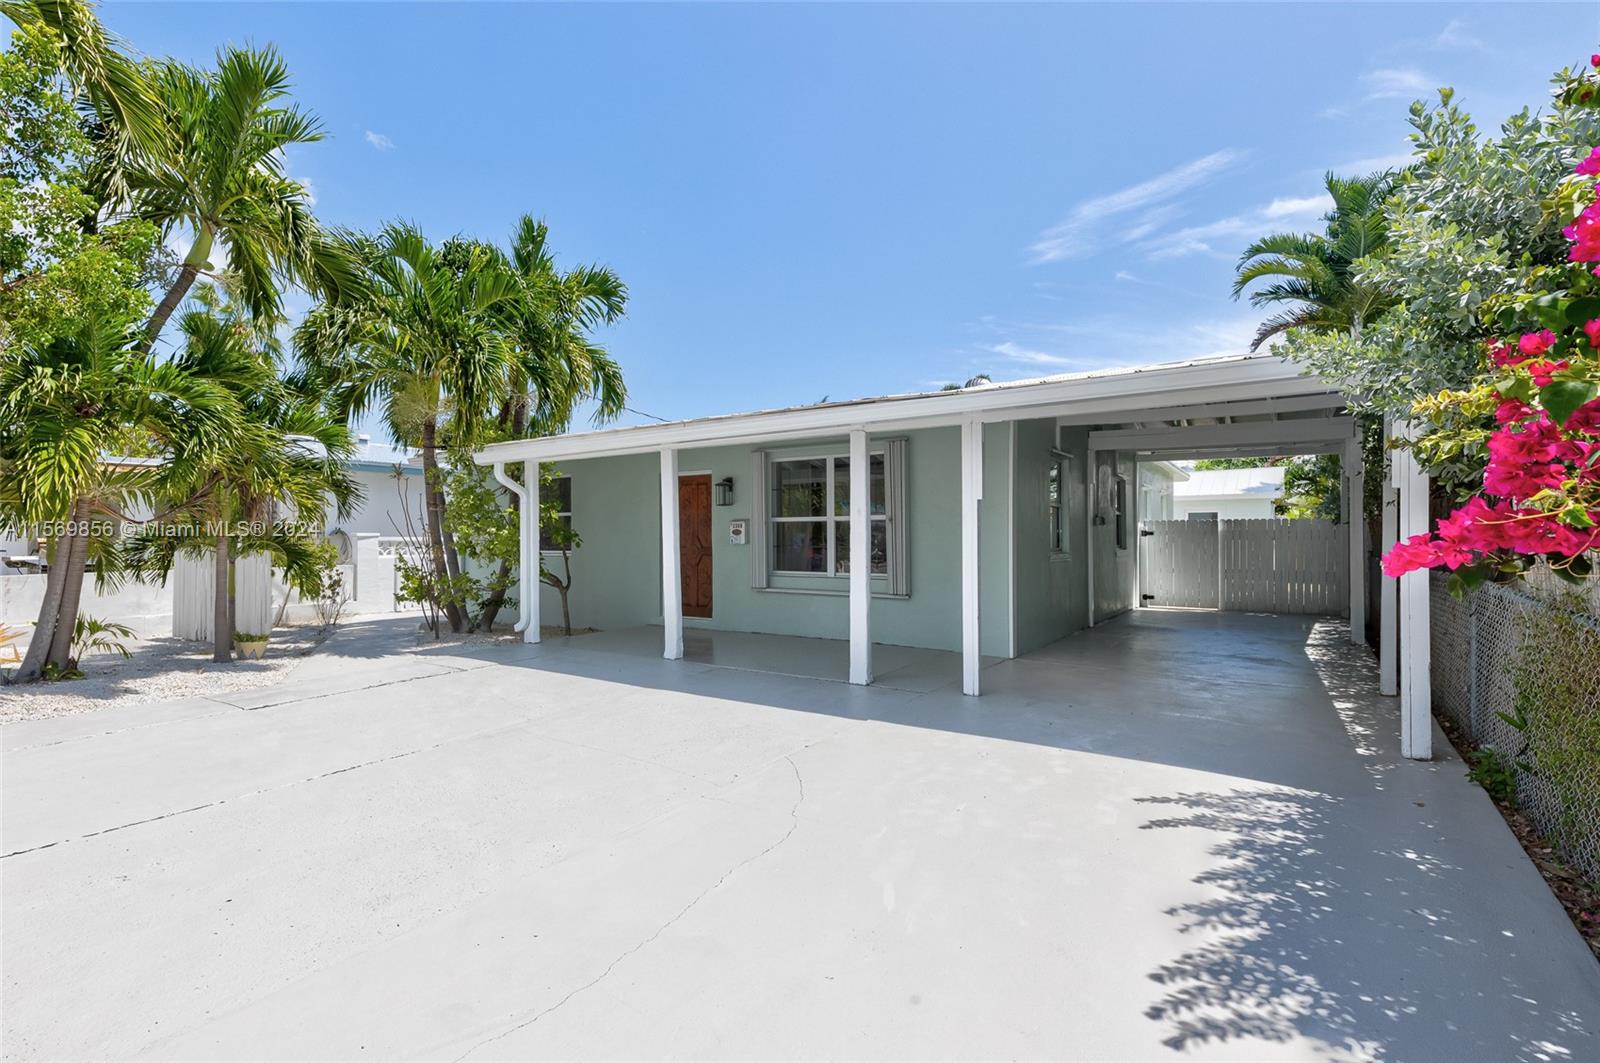 2308 Patterson Ave, Key West, Monroe County, Florida - 4 Bedrooms  
3 Bathrooms - 